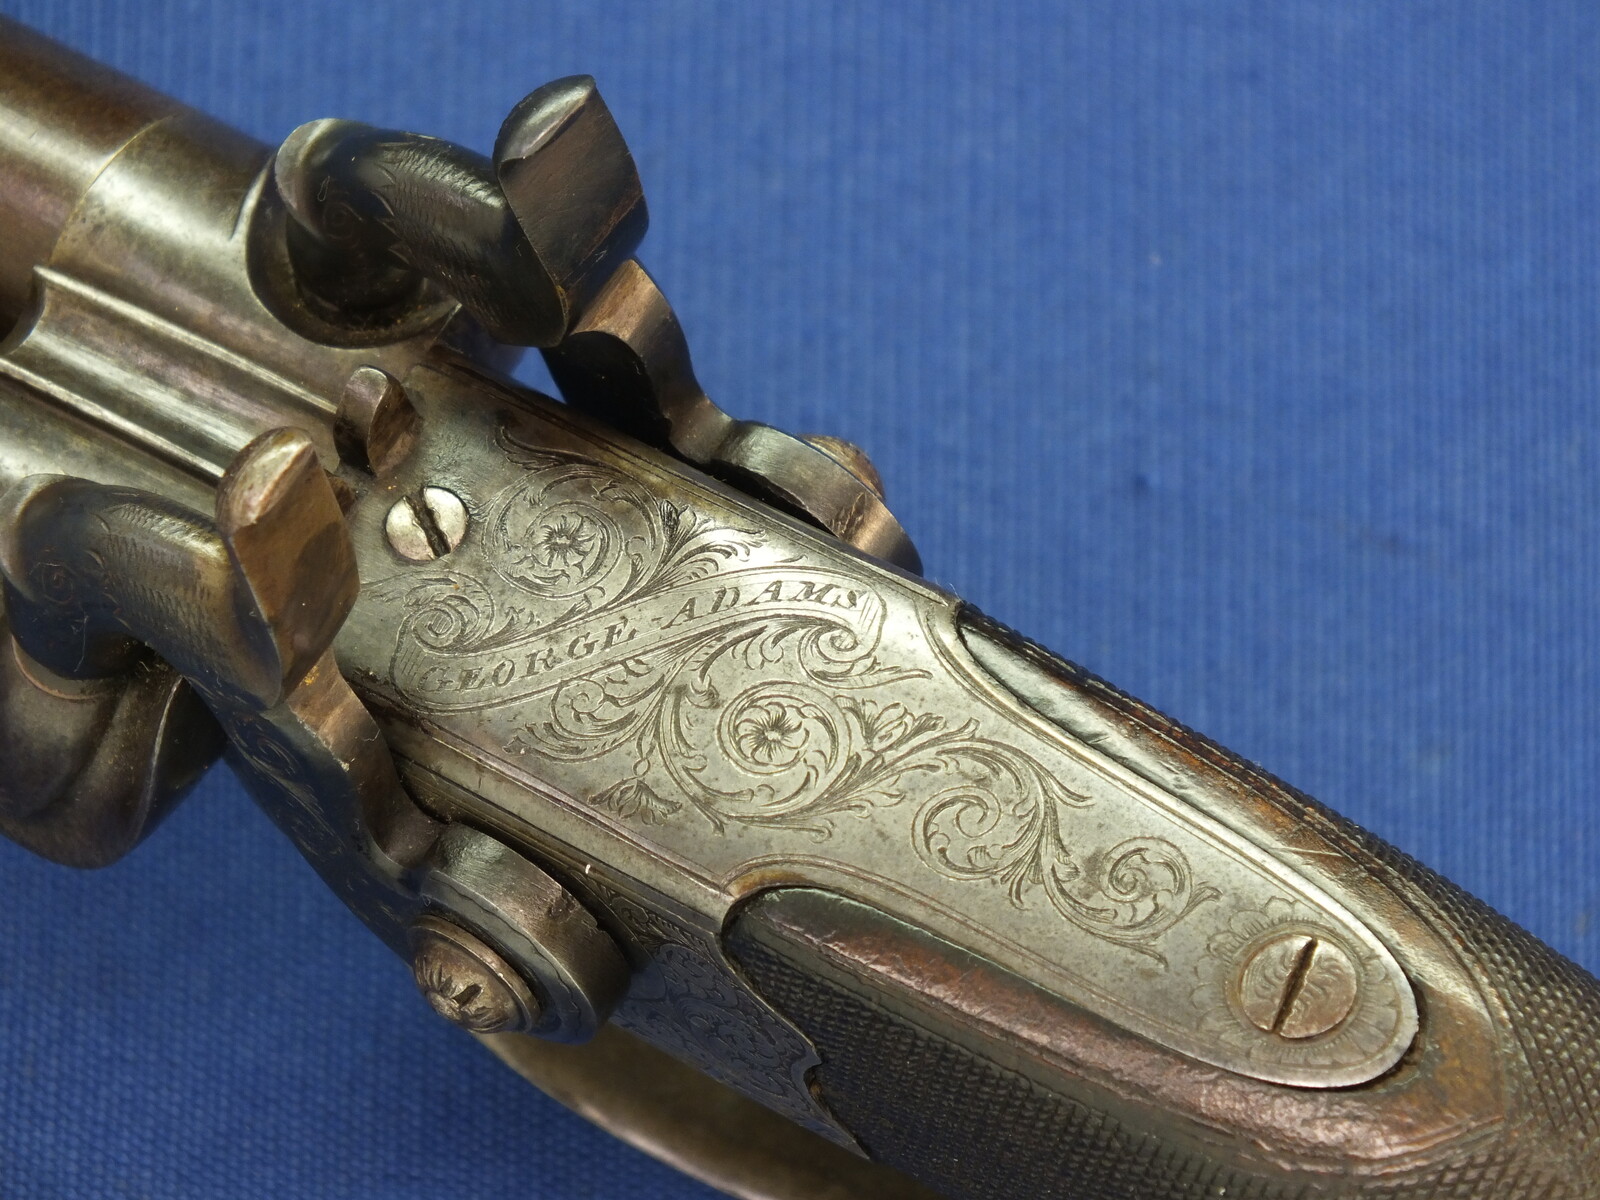 An antique English 19th century circa 1850 Box-Lock percussion double barreled pistol. By George Adams. Caliber 12mm. Length 25,5cm. In very good condition. Price 950 euro.